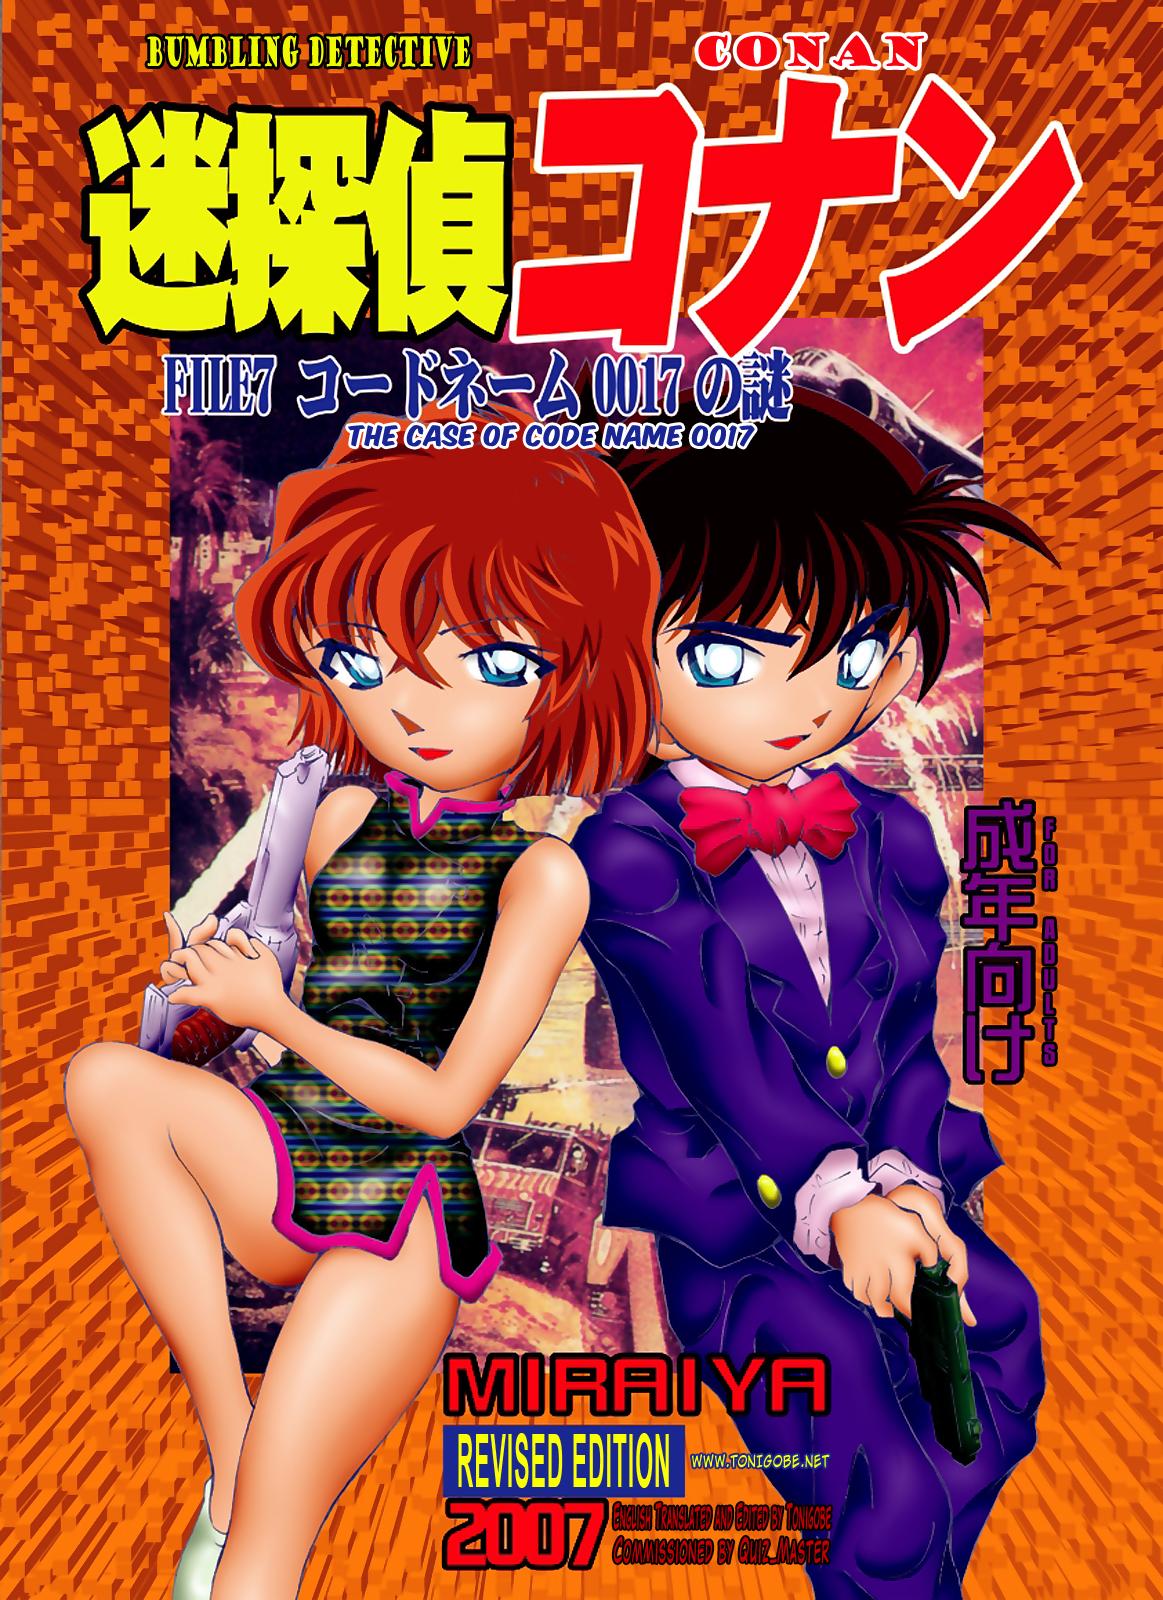 Teenager Bumbling Detective Conan - File 7: The Case of Code Name 0017 - Detective conan Home - Picture 1